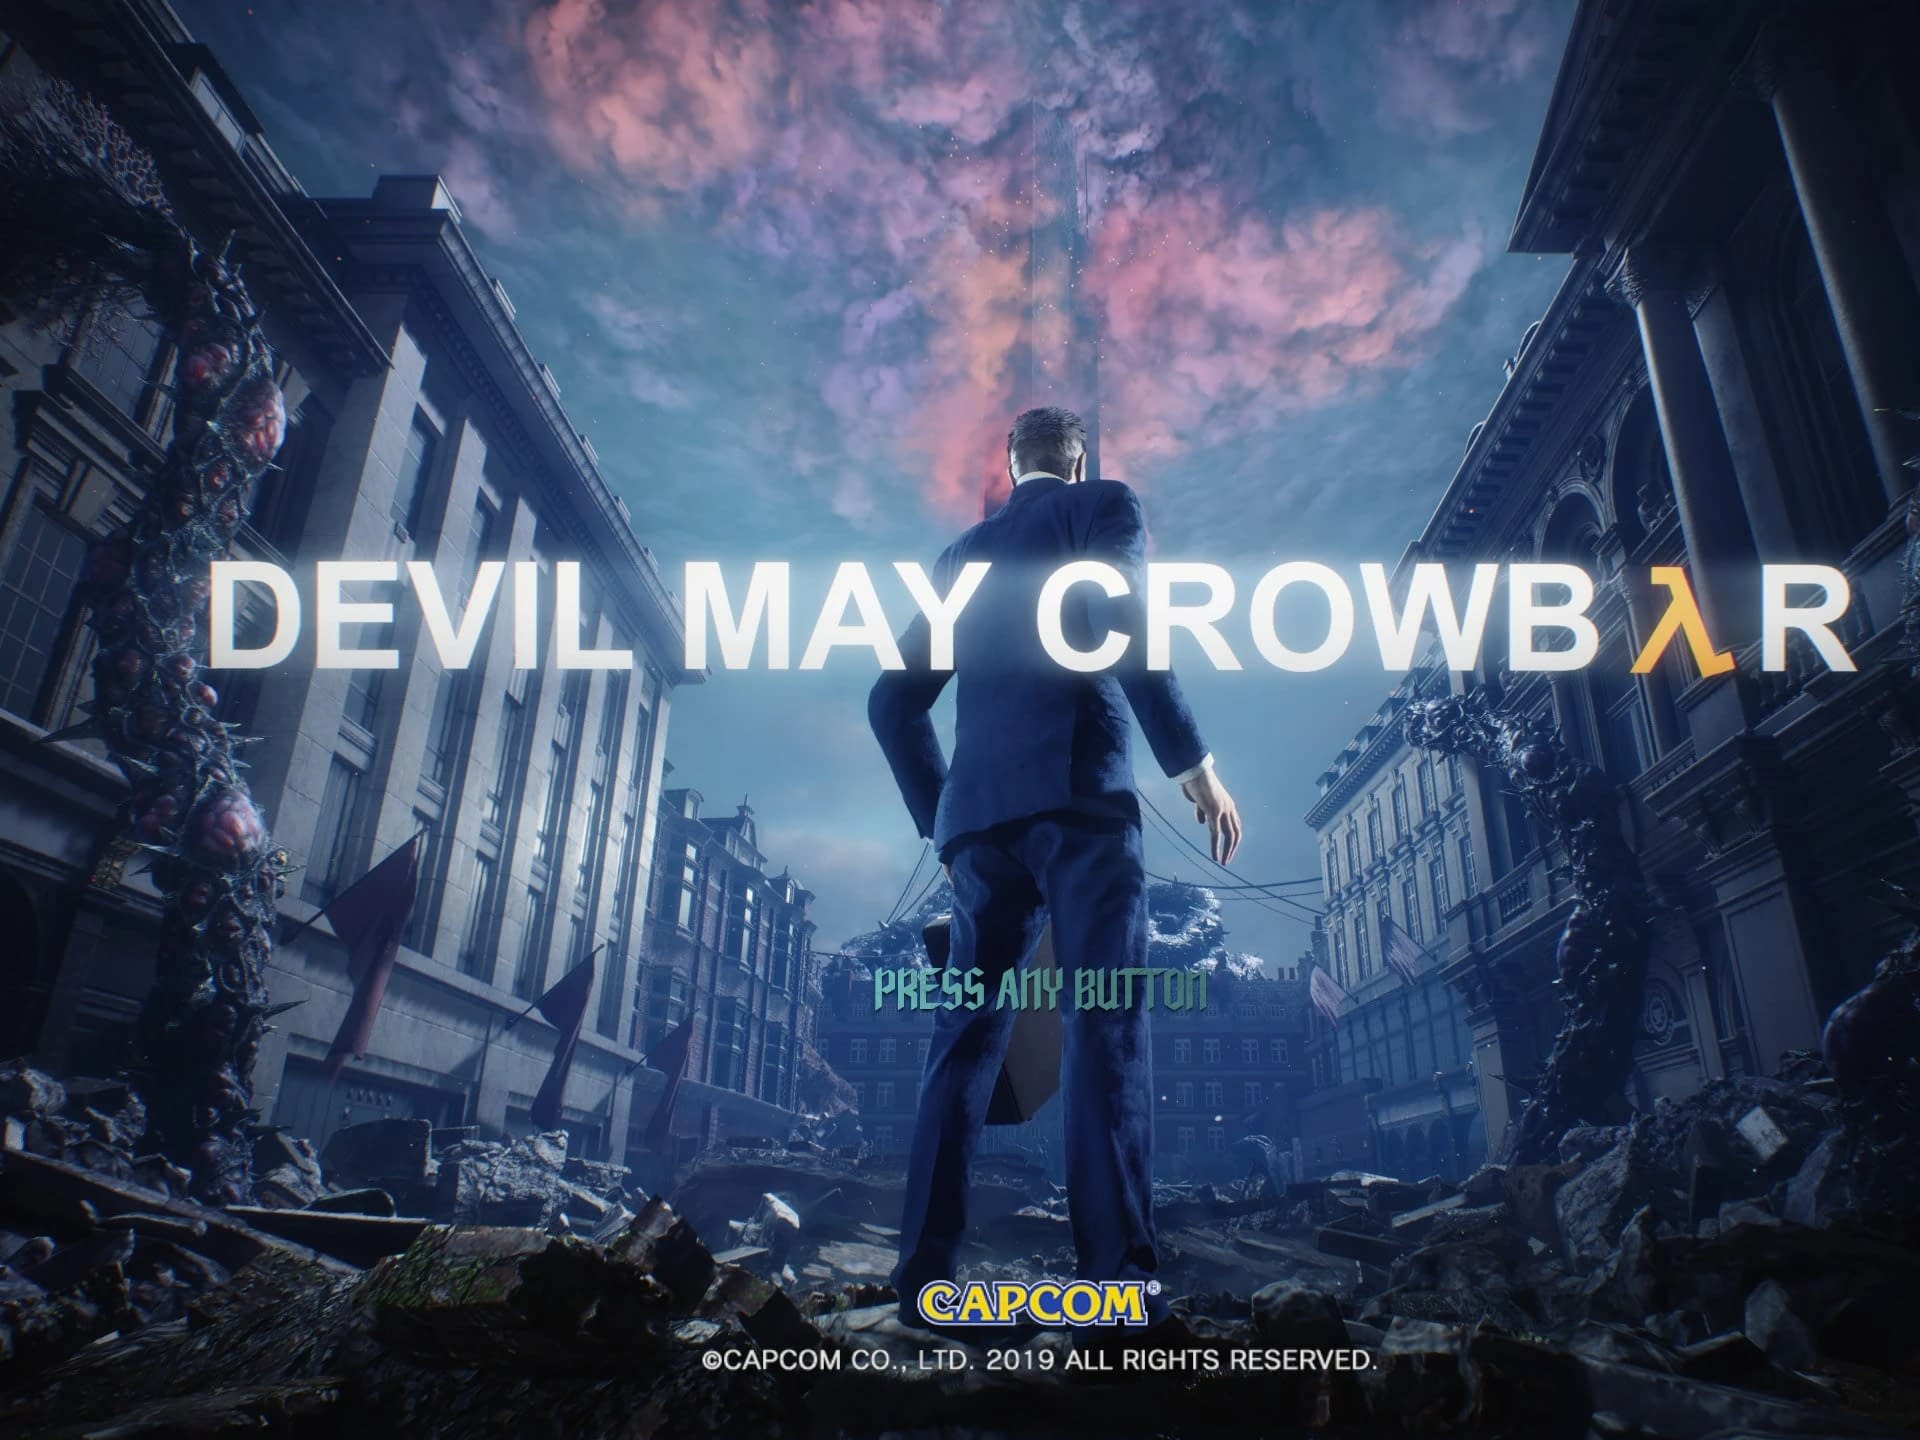 Remarkable Half Life 2 Mode Released For Devil May Cry 5